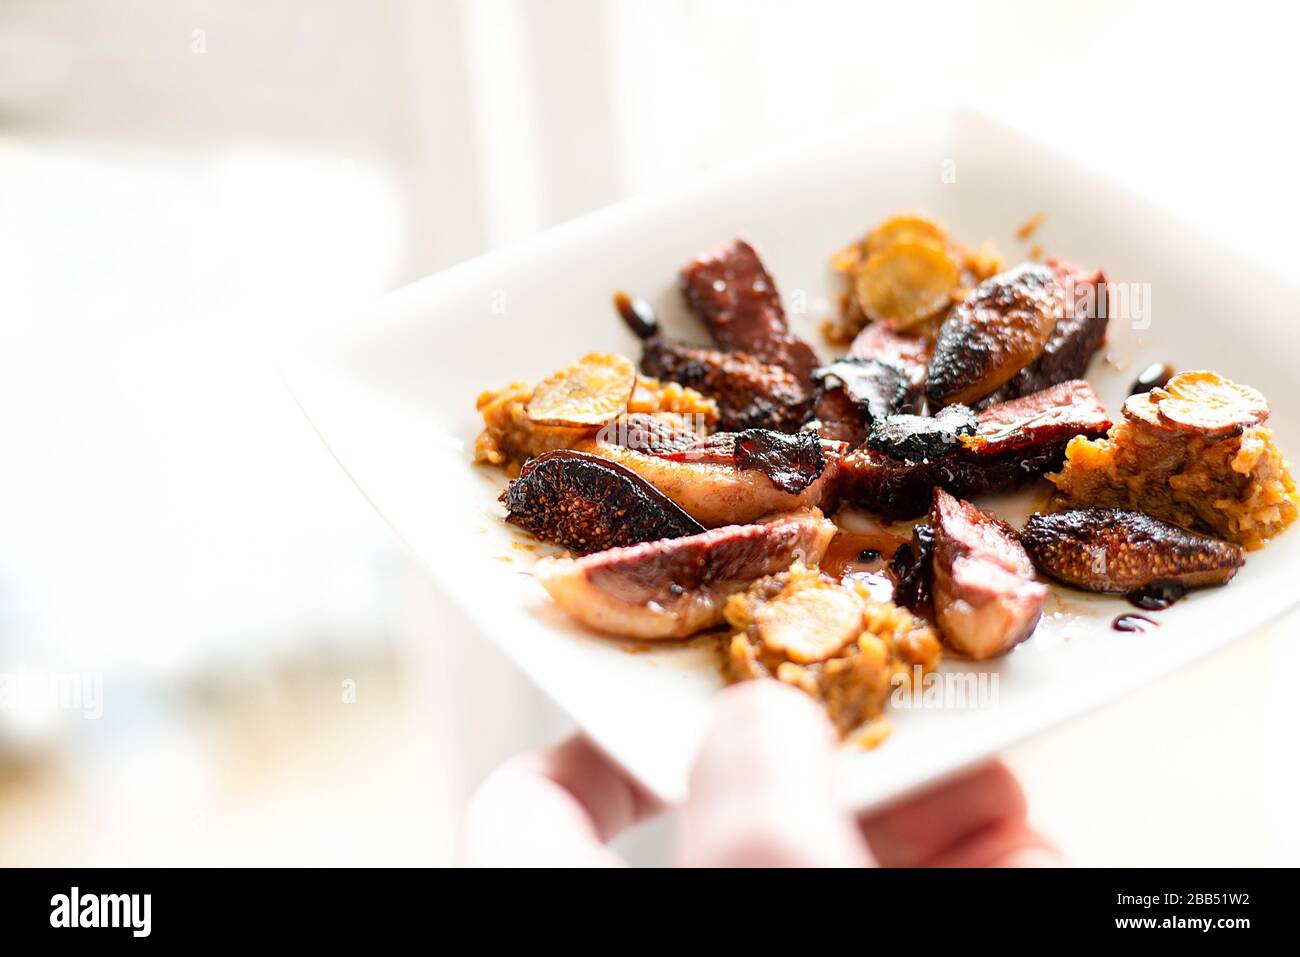 Plate of fine dining well presented Duck and Plum dish. Stock Photo